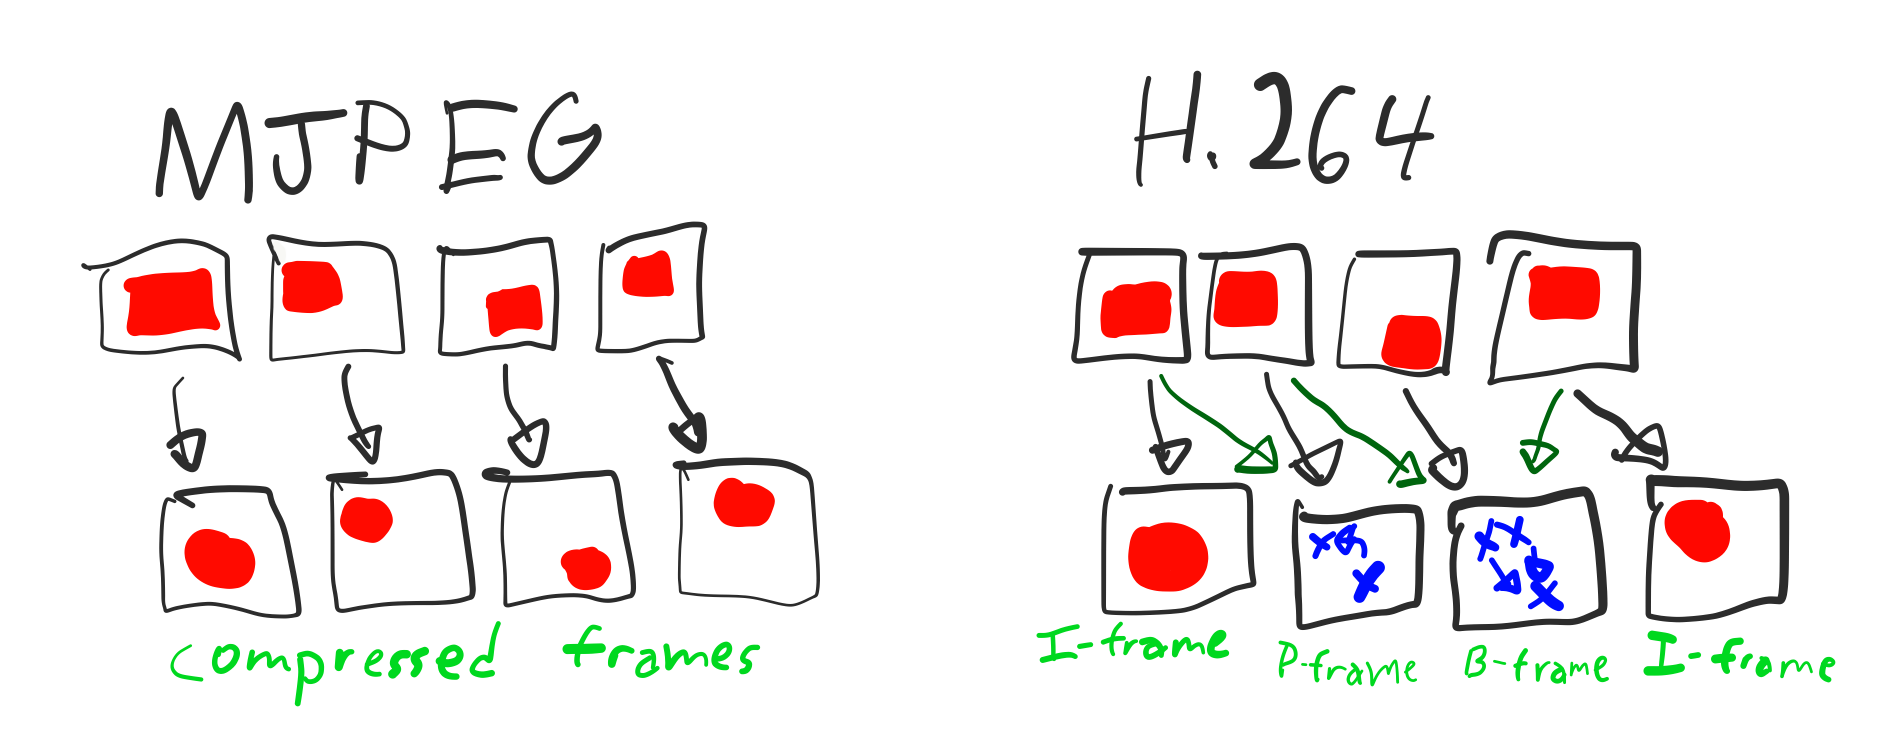 Visualization of MJPEG and H.264 differences